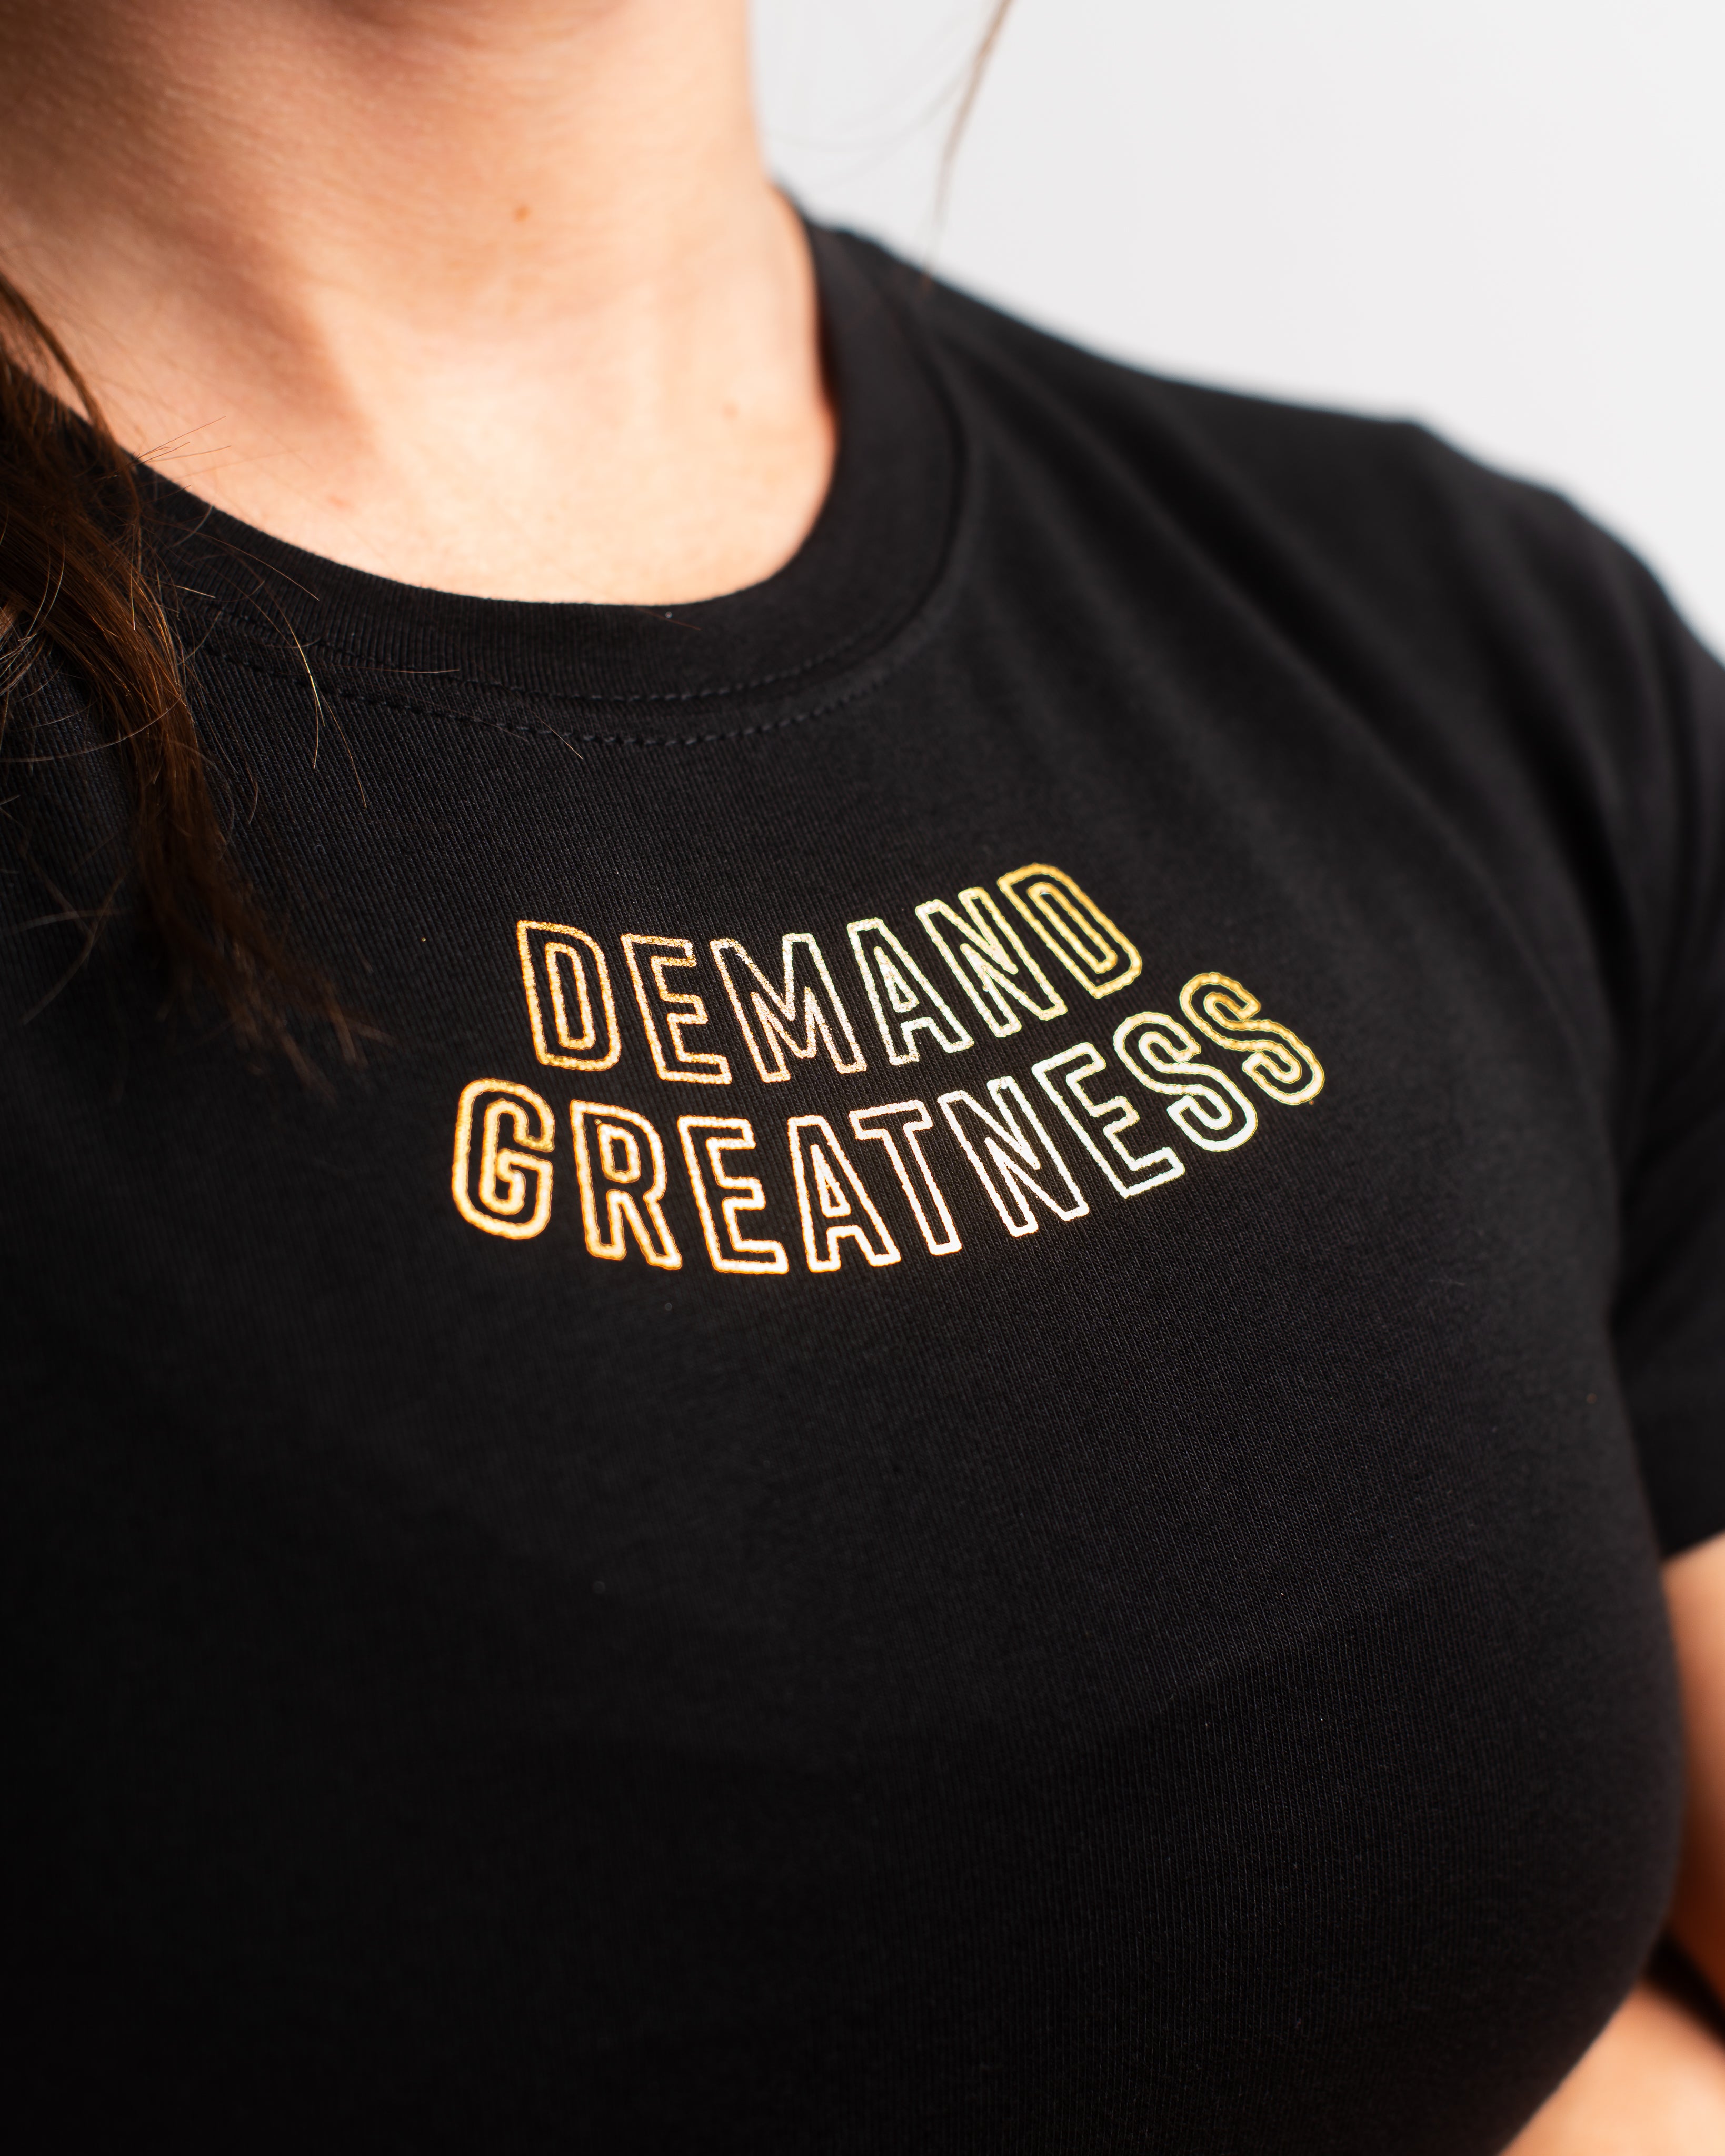 DG23 IPF Approved Meet Shirt Gold Standard is our new meet shirt with Demand Greatness with a double outline font to showcase your impact on the platform. Shop the full A7 Powerlifting IPF Approved Equipment collection including Powerlifting Singlet, A7 Meet Shirt, A7 Zebra Wrist Wraps, A7 Deadlift Socks, Hourglass Knee Sleeves (Stiff Knee Sleeves and Rigor Mortis Knee Sleeves). PAL Lever is now IPF Approved. Genouillères powerlifting shipping to France, Spain, Ireland, Germany, Italy, Sweden and EU.